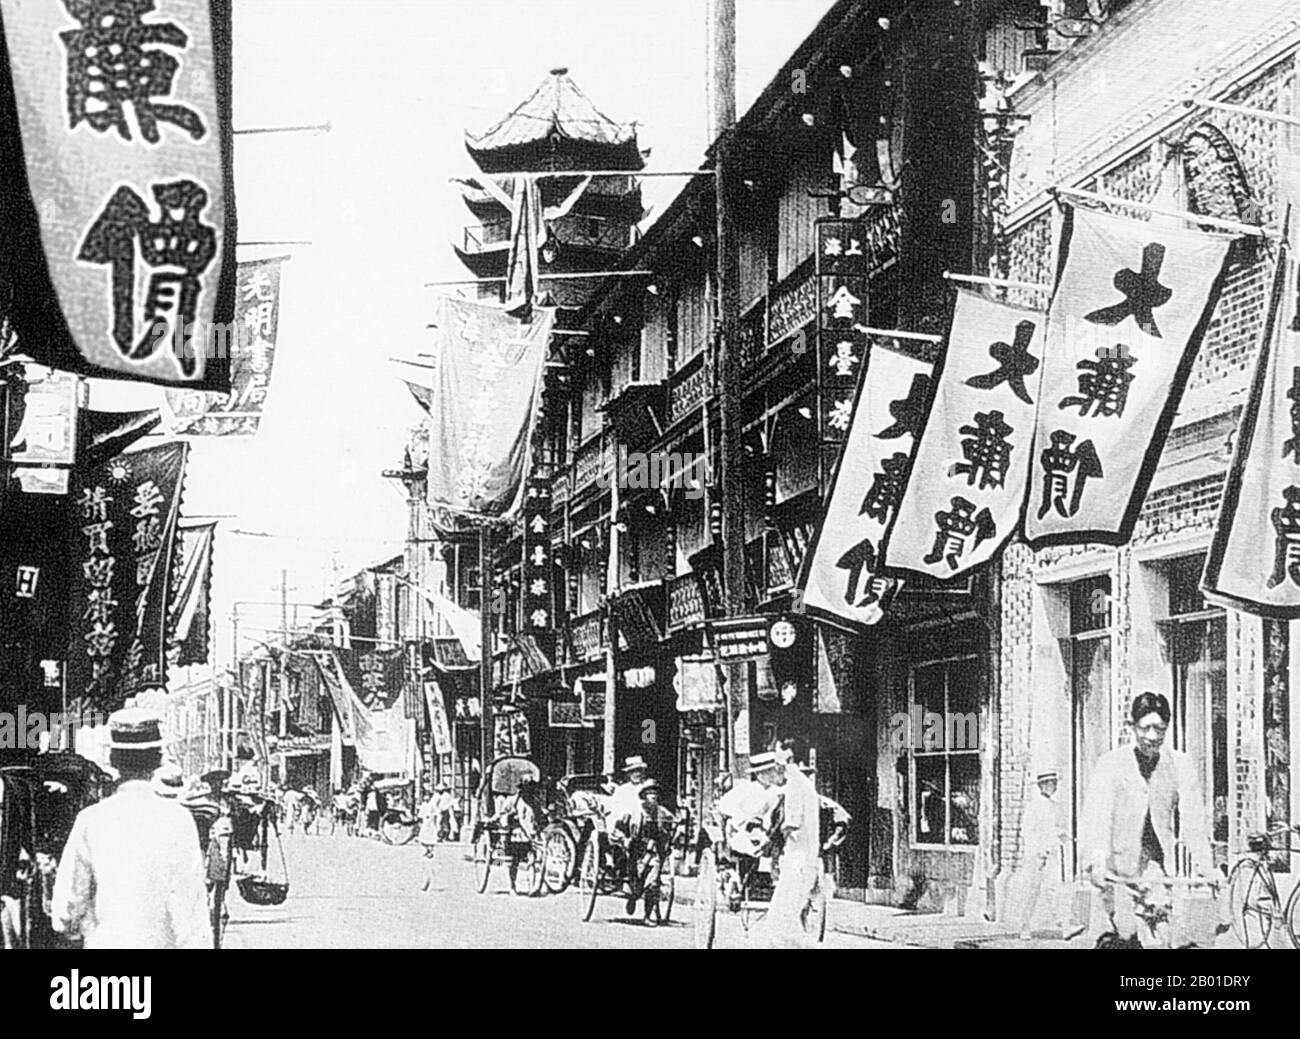 China: A long row of shops on Shanghai's Fuzhou Road, 1930s.  Shanghai (Chinese: 上 海; Pinyin Shànghǎi) is one of the largest cities by population in the People's Republic of China, and the world. The city is located in eastern China, at the middle portion of the Chinese coast, and sits at the mouth of the Yangtze River. Due to its rapid growth over the last two decades it has again become a global city, exerting influence over finance, commerce, fashion, technology and culture.  Once a mere fishing and textiles town, Shanghai grew in importance in the 19th century. Stock Photo